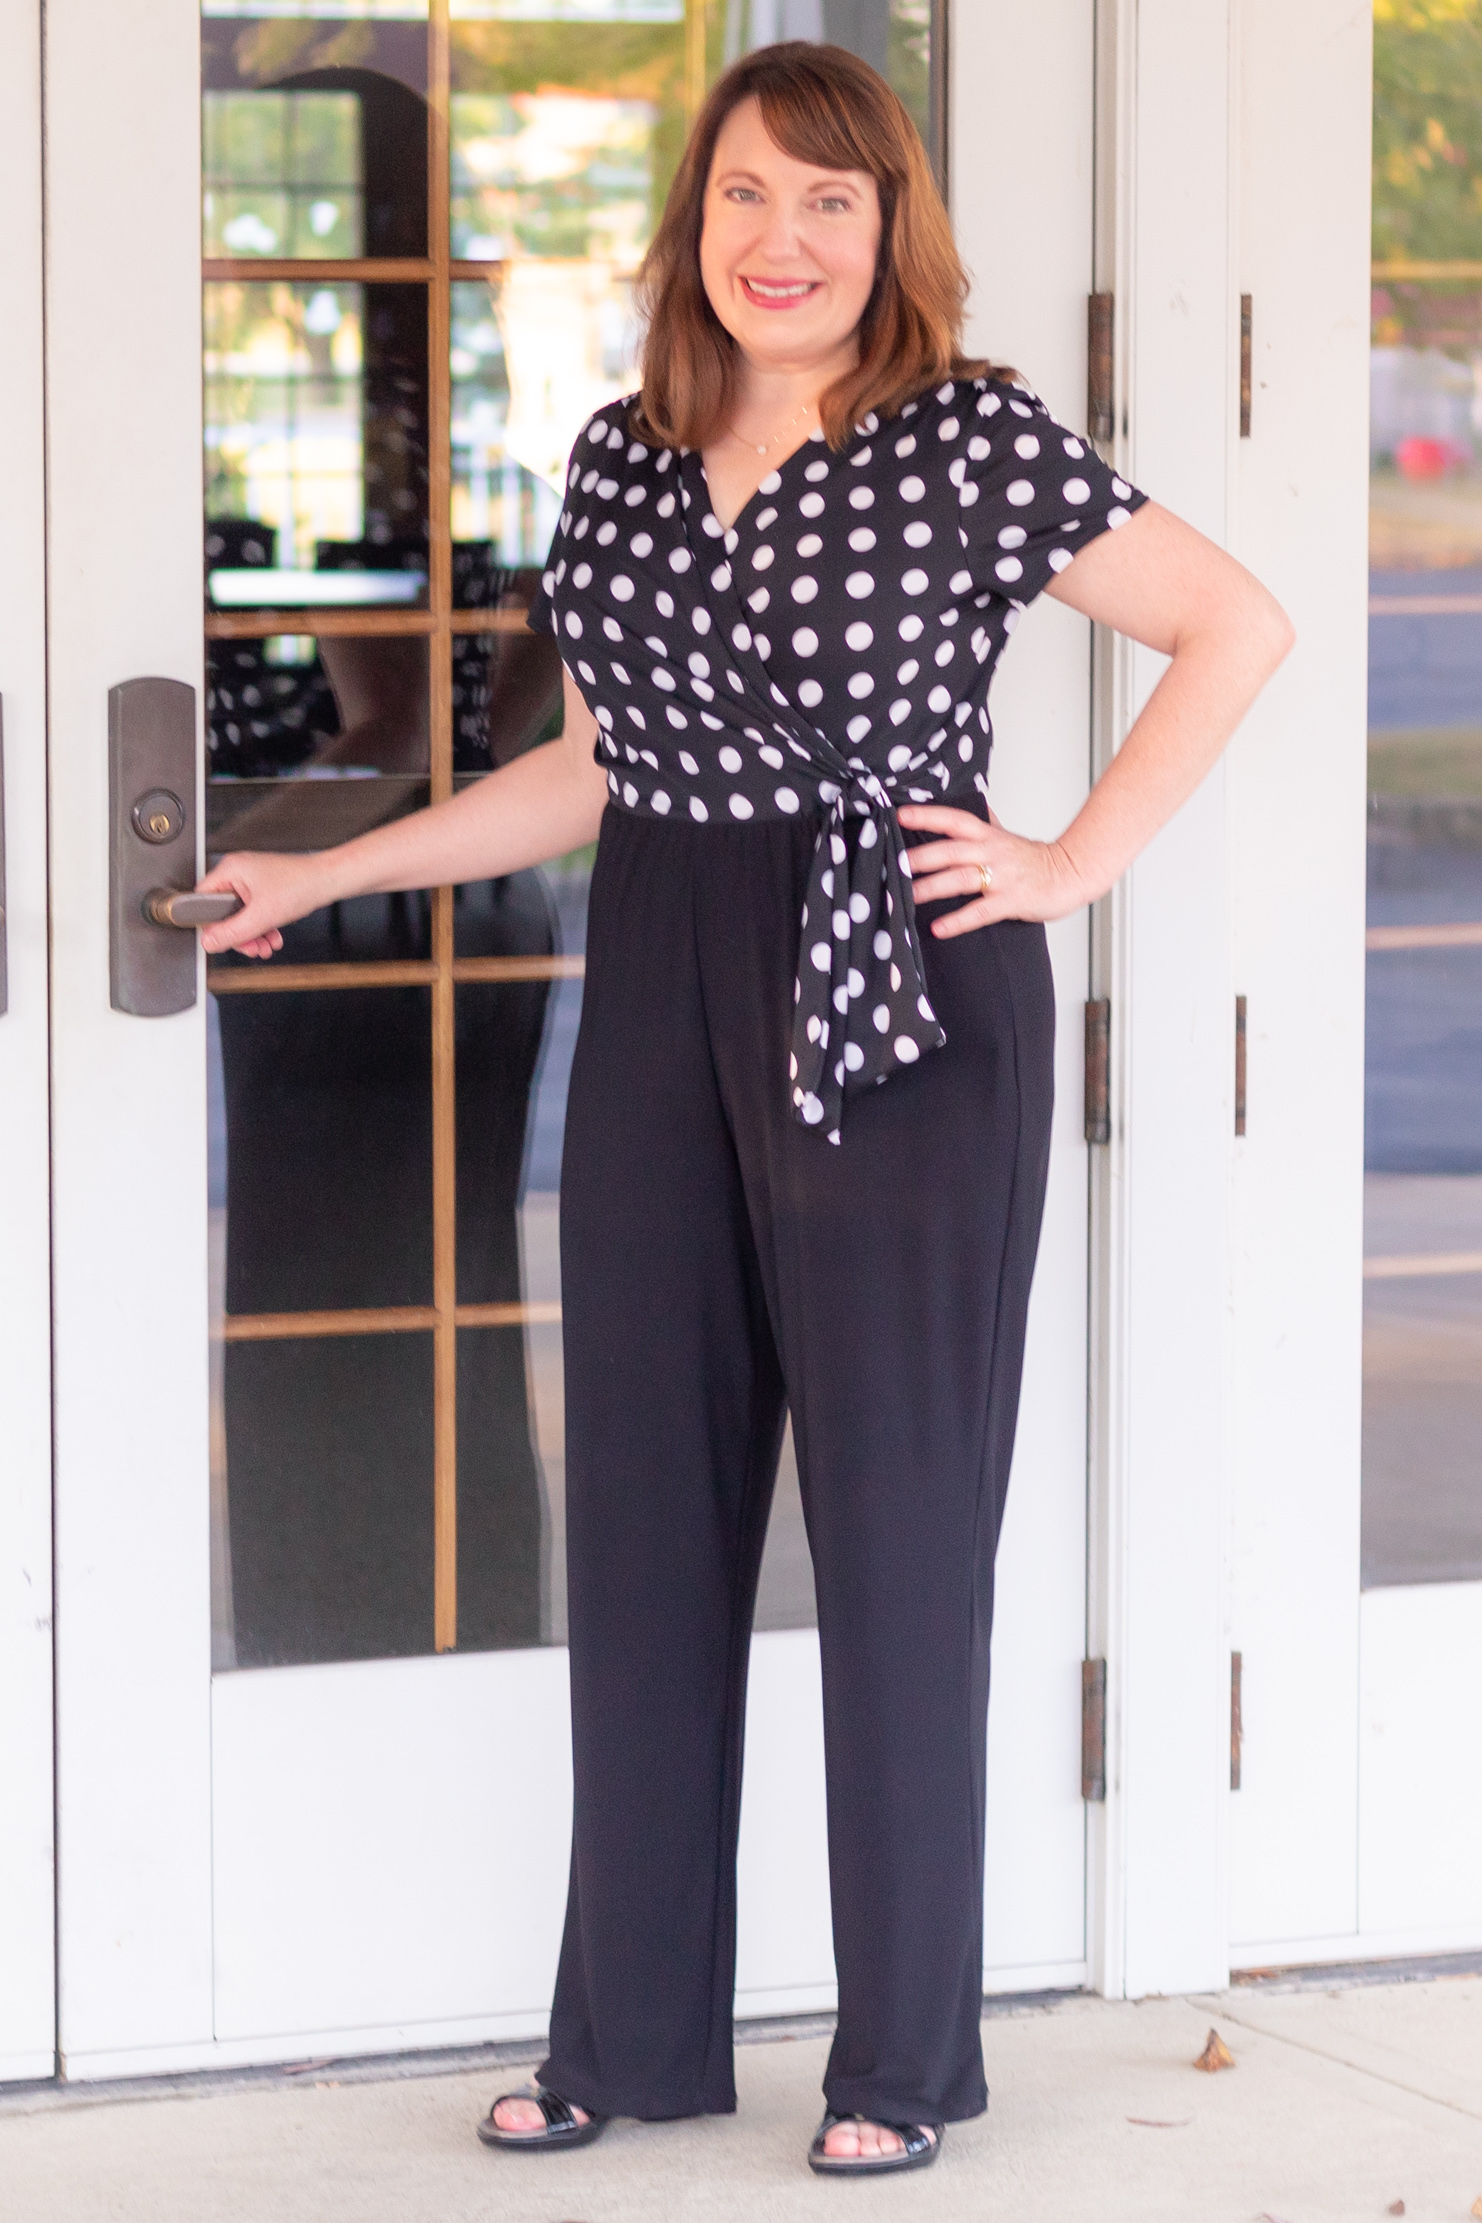 Black & White Jumpsuit for Fall